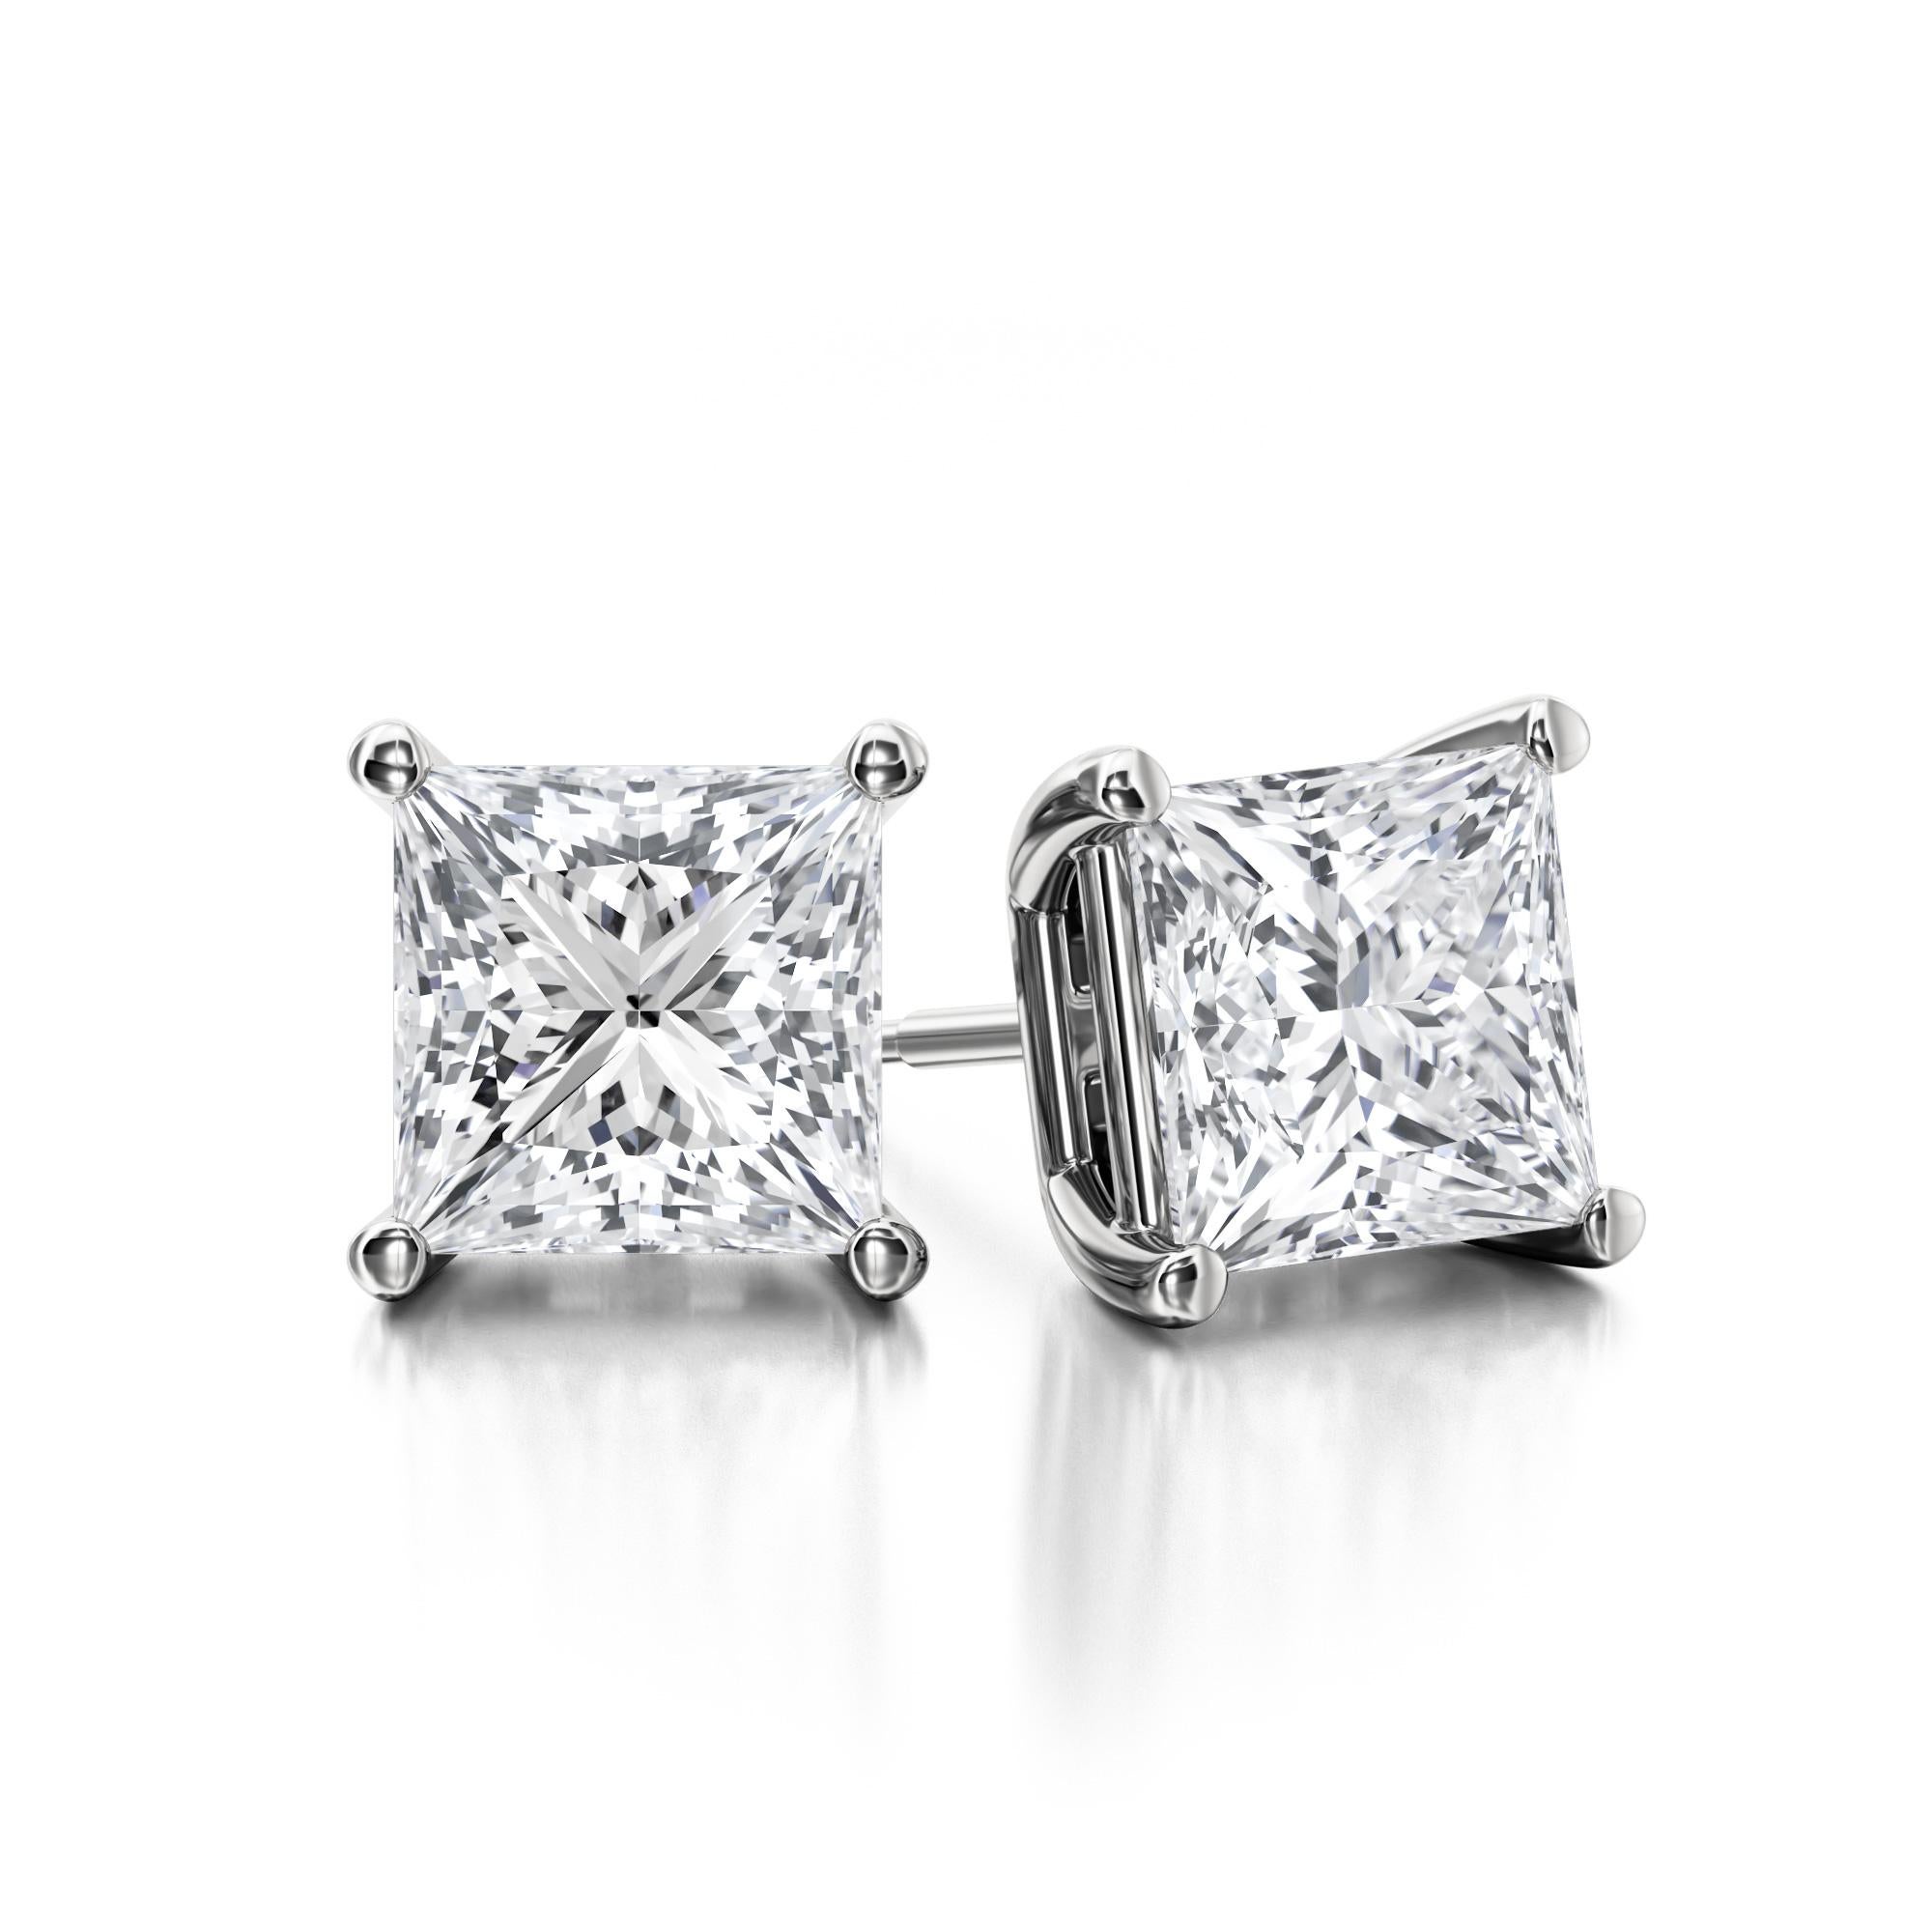 Classic Four Prong Princess Cut Diamond Stud Earrings, featuring:
✧ 2 natural diamonds G-H color SI1-SI2 weighing 0.50 carats+
✧ Measurements: 3.25mm*3.25mm
✧ Available in 14K White Gold
✧ Push back friction closure
✧ Free appraisal included with